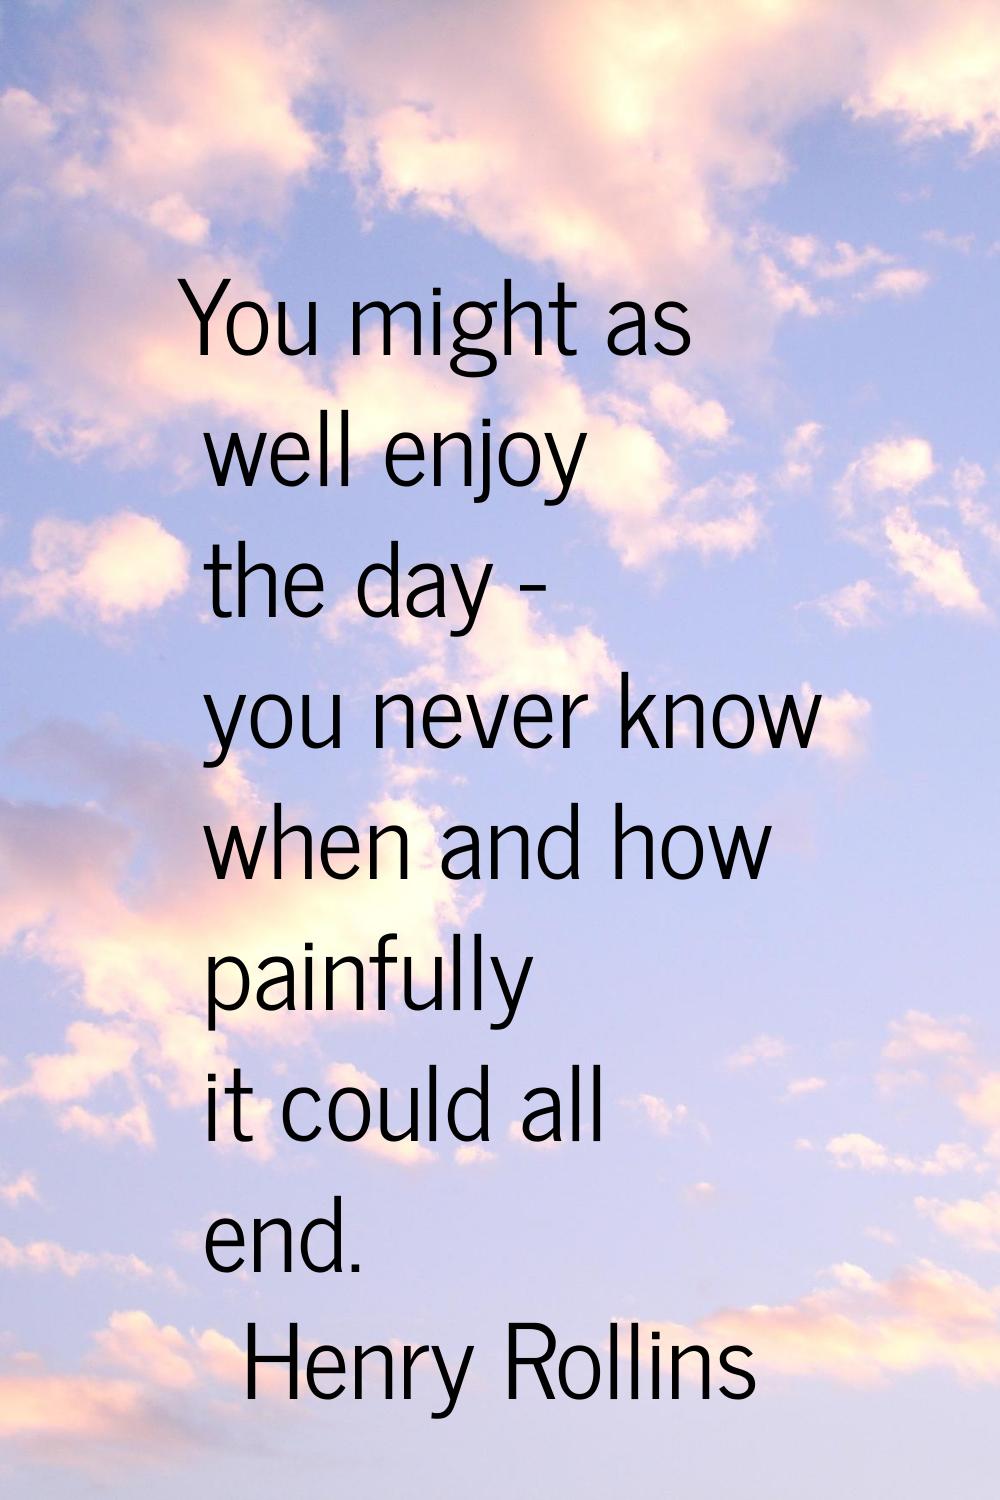 You might as well enjoy the day - you never know when and how painfully it could all end.